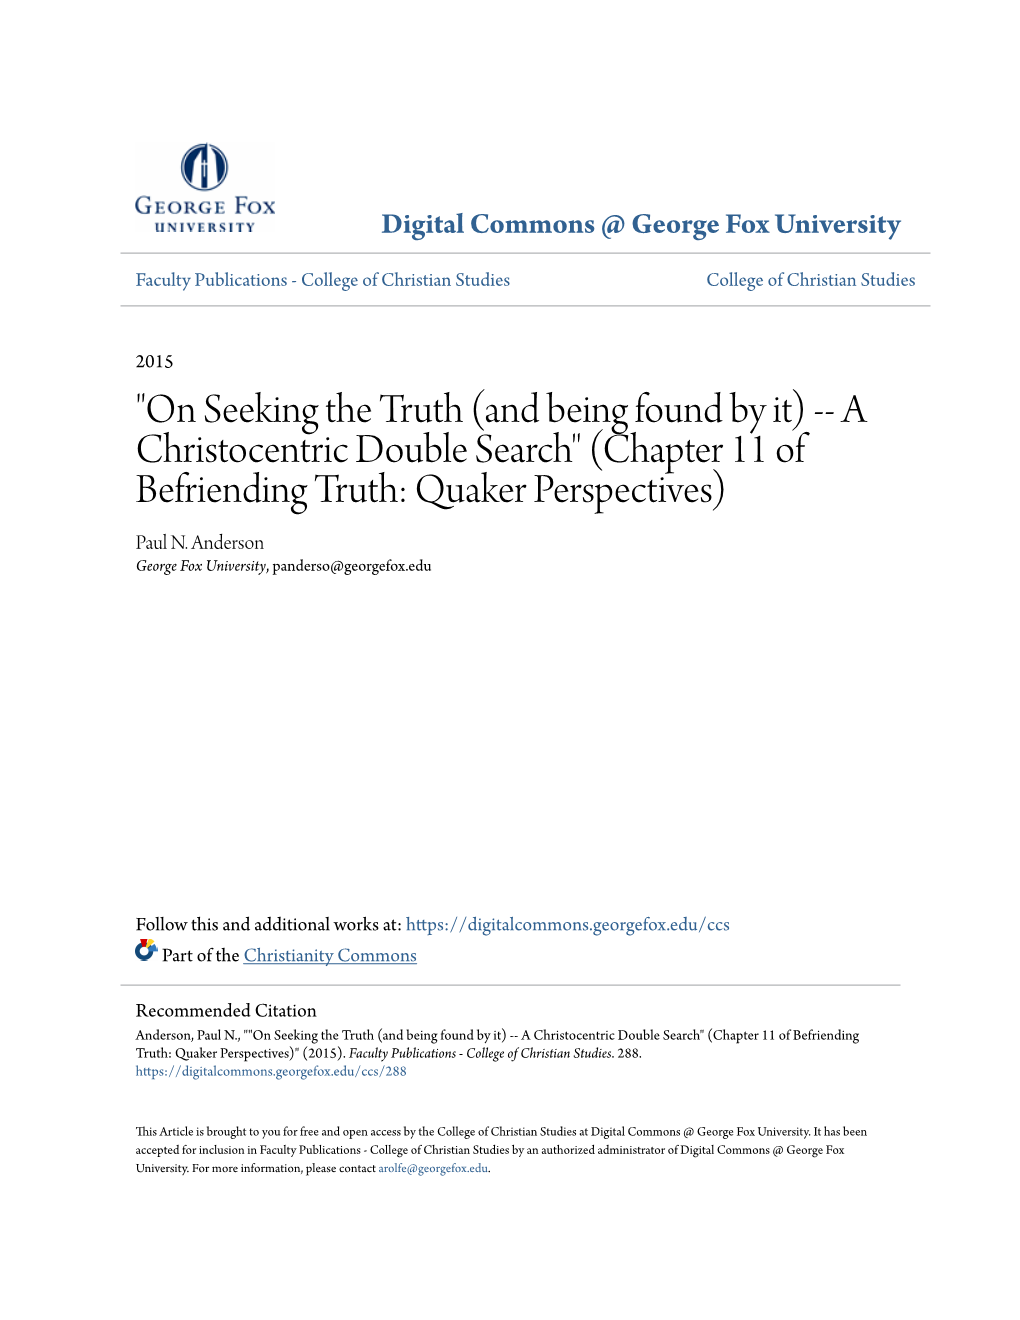 "On Seeking the Truth (And Being Found by It) -- a Christocentric Double Search" (Chapter 11 of Befriending Truth: Quaker Perspectives) Paul N